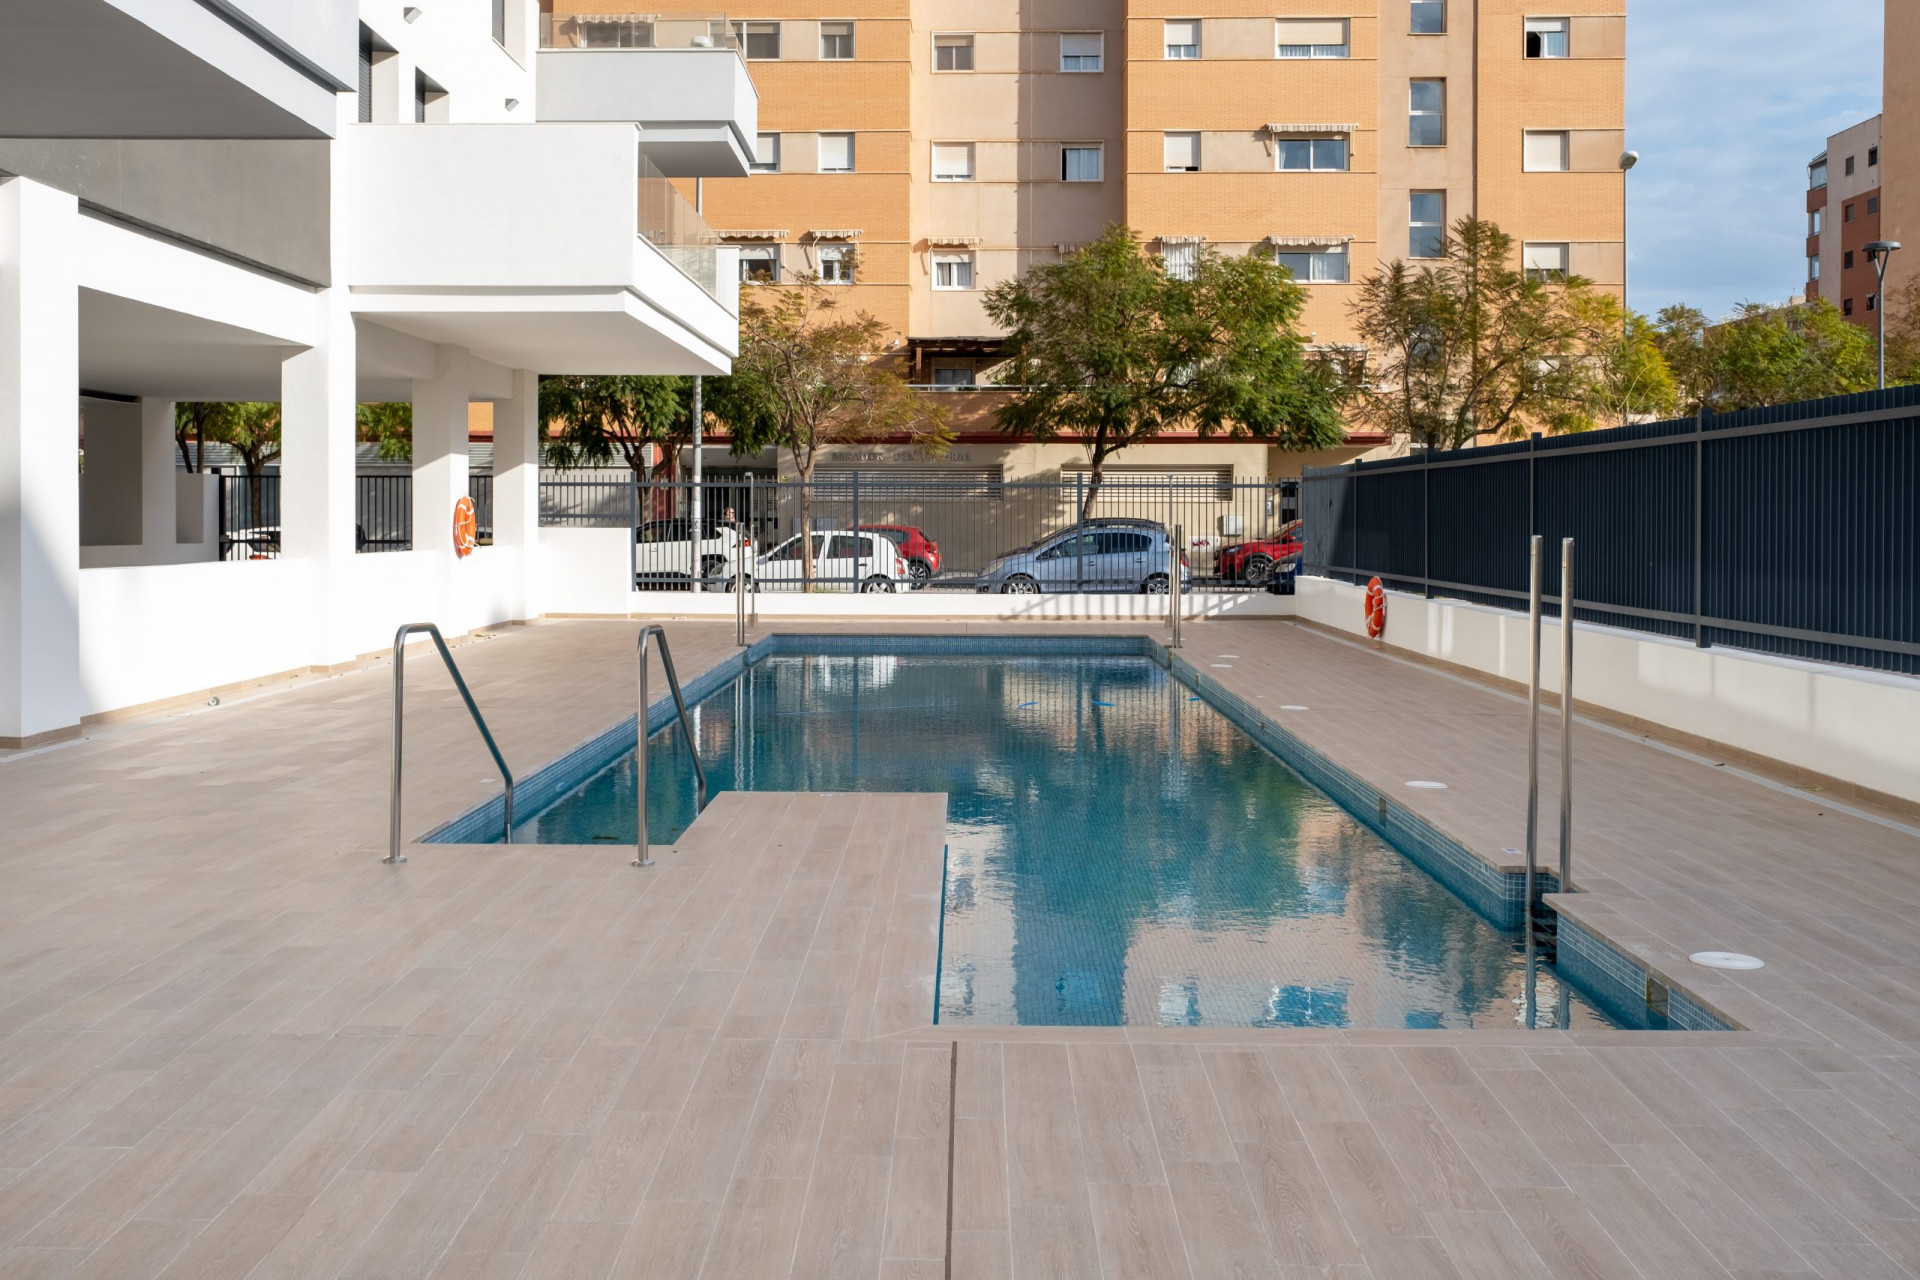 Urban Litoral: New units located in the area of Parque Litoral, in the city of Malaga. | Image 1